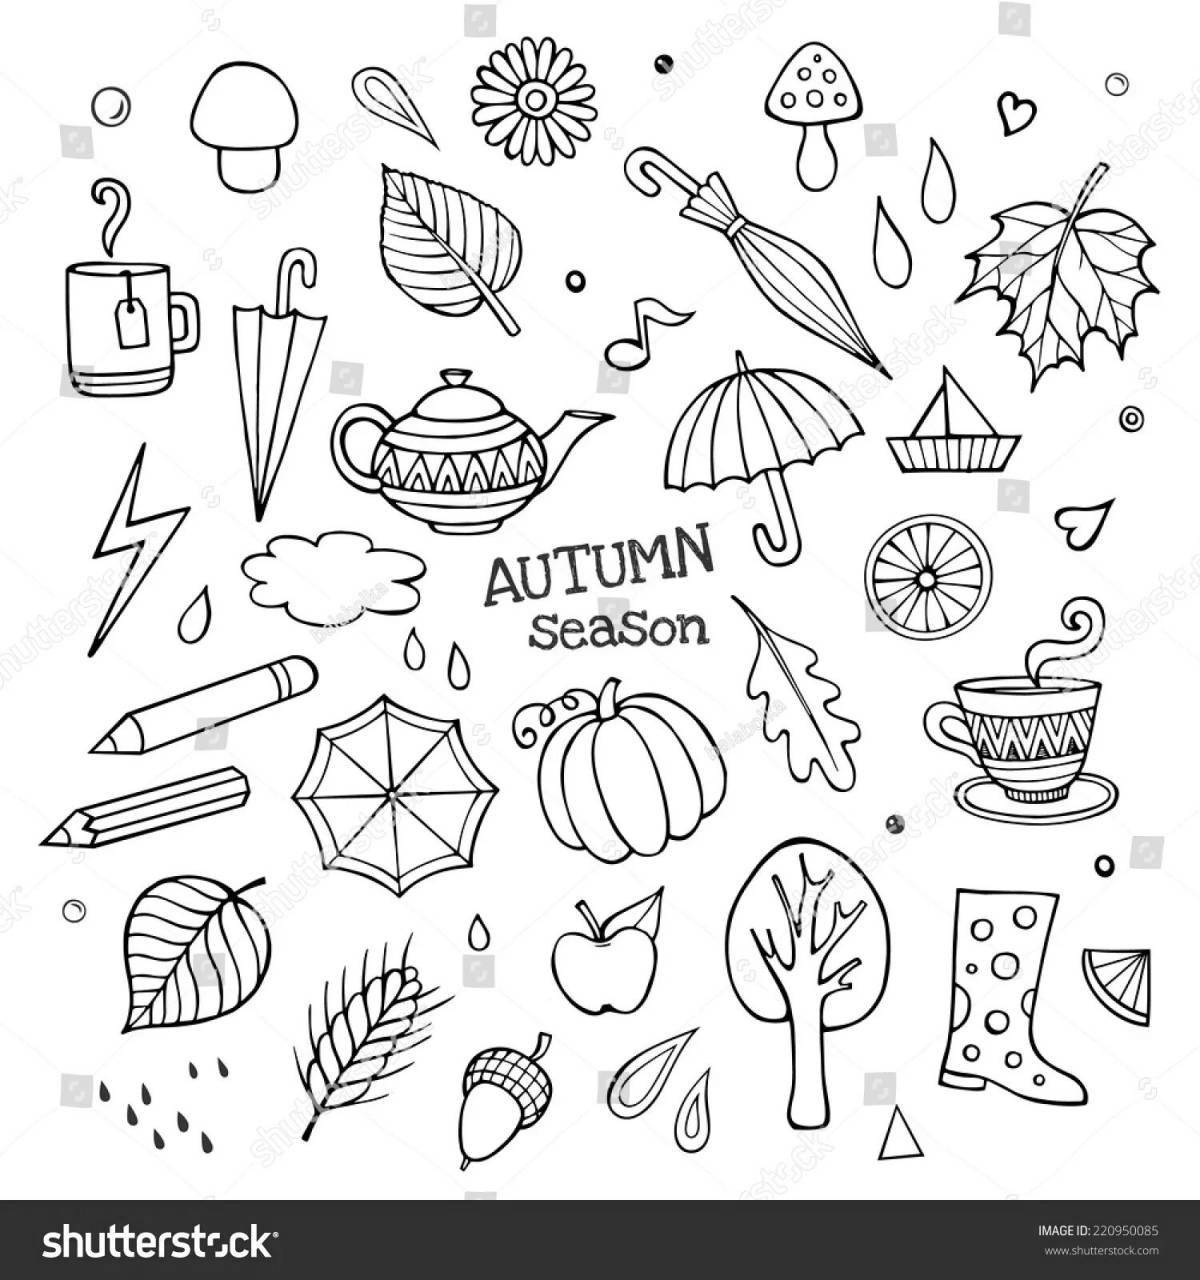 Fun stickers for coloring diary